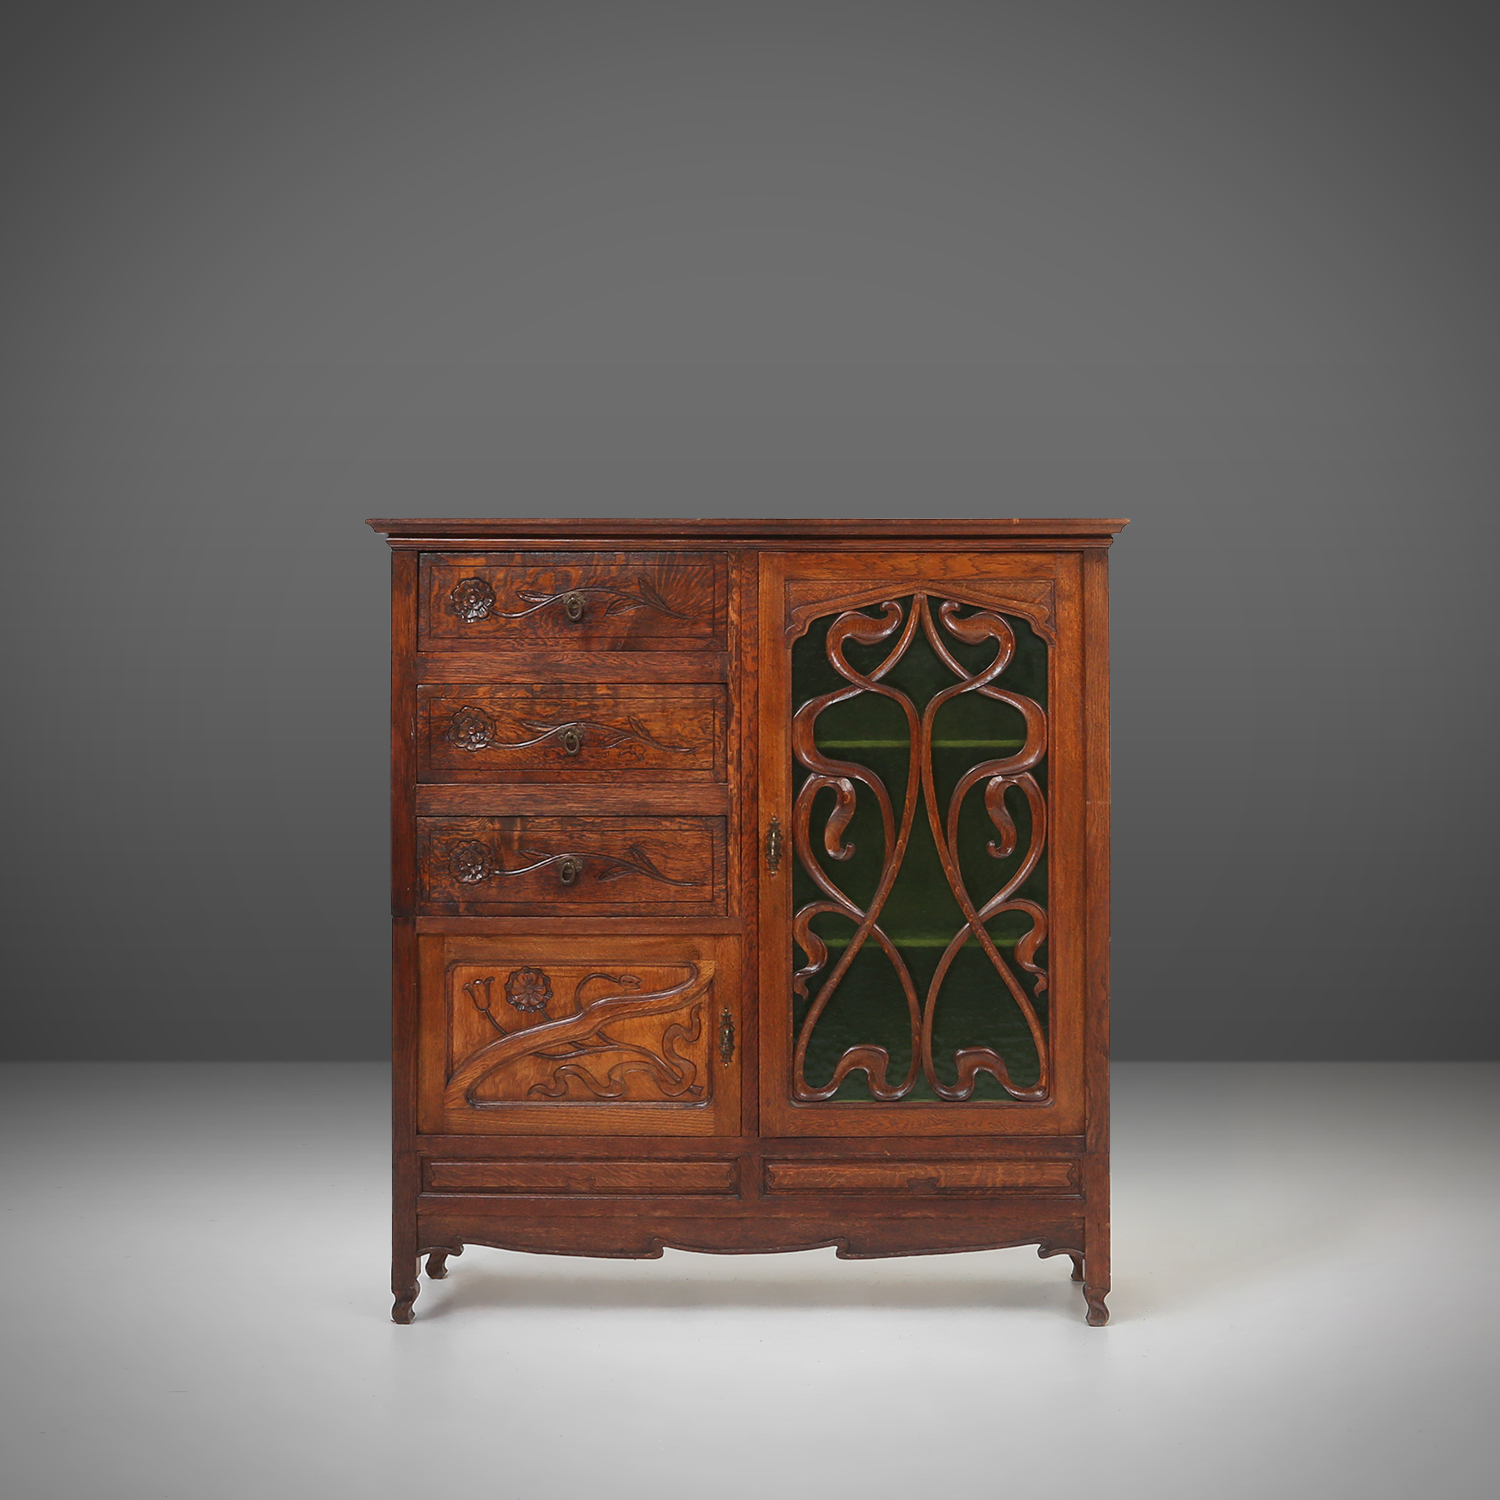 Remarkable Art Nouveau cabinet in oak with green glass, France, 1910thumbnail